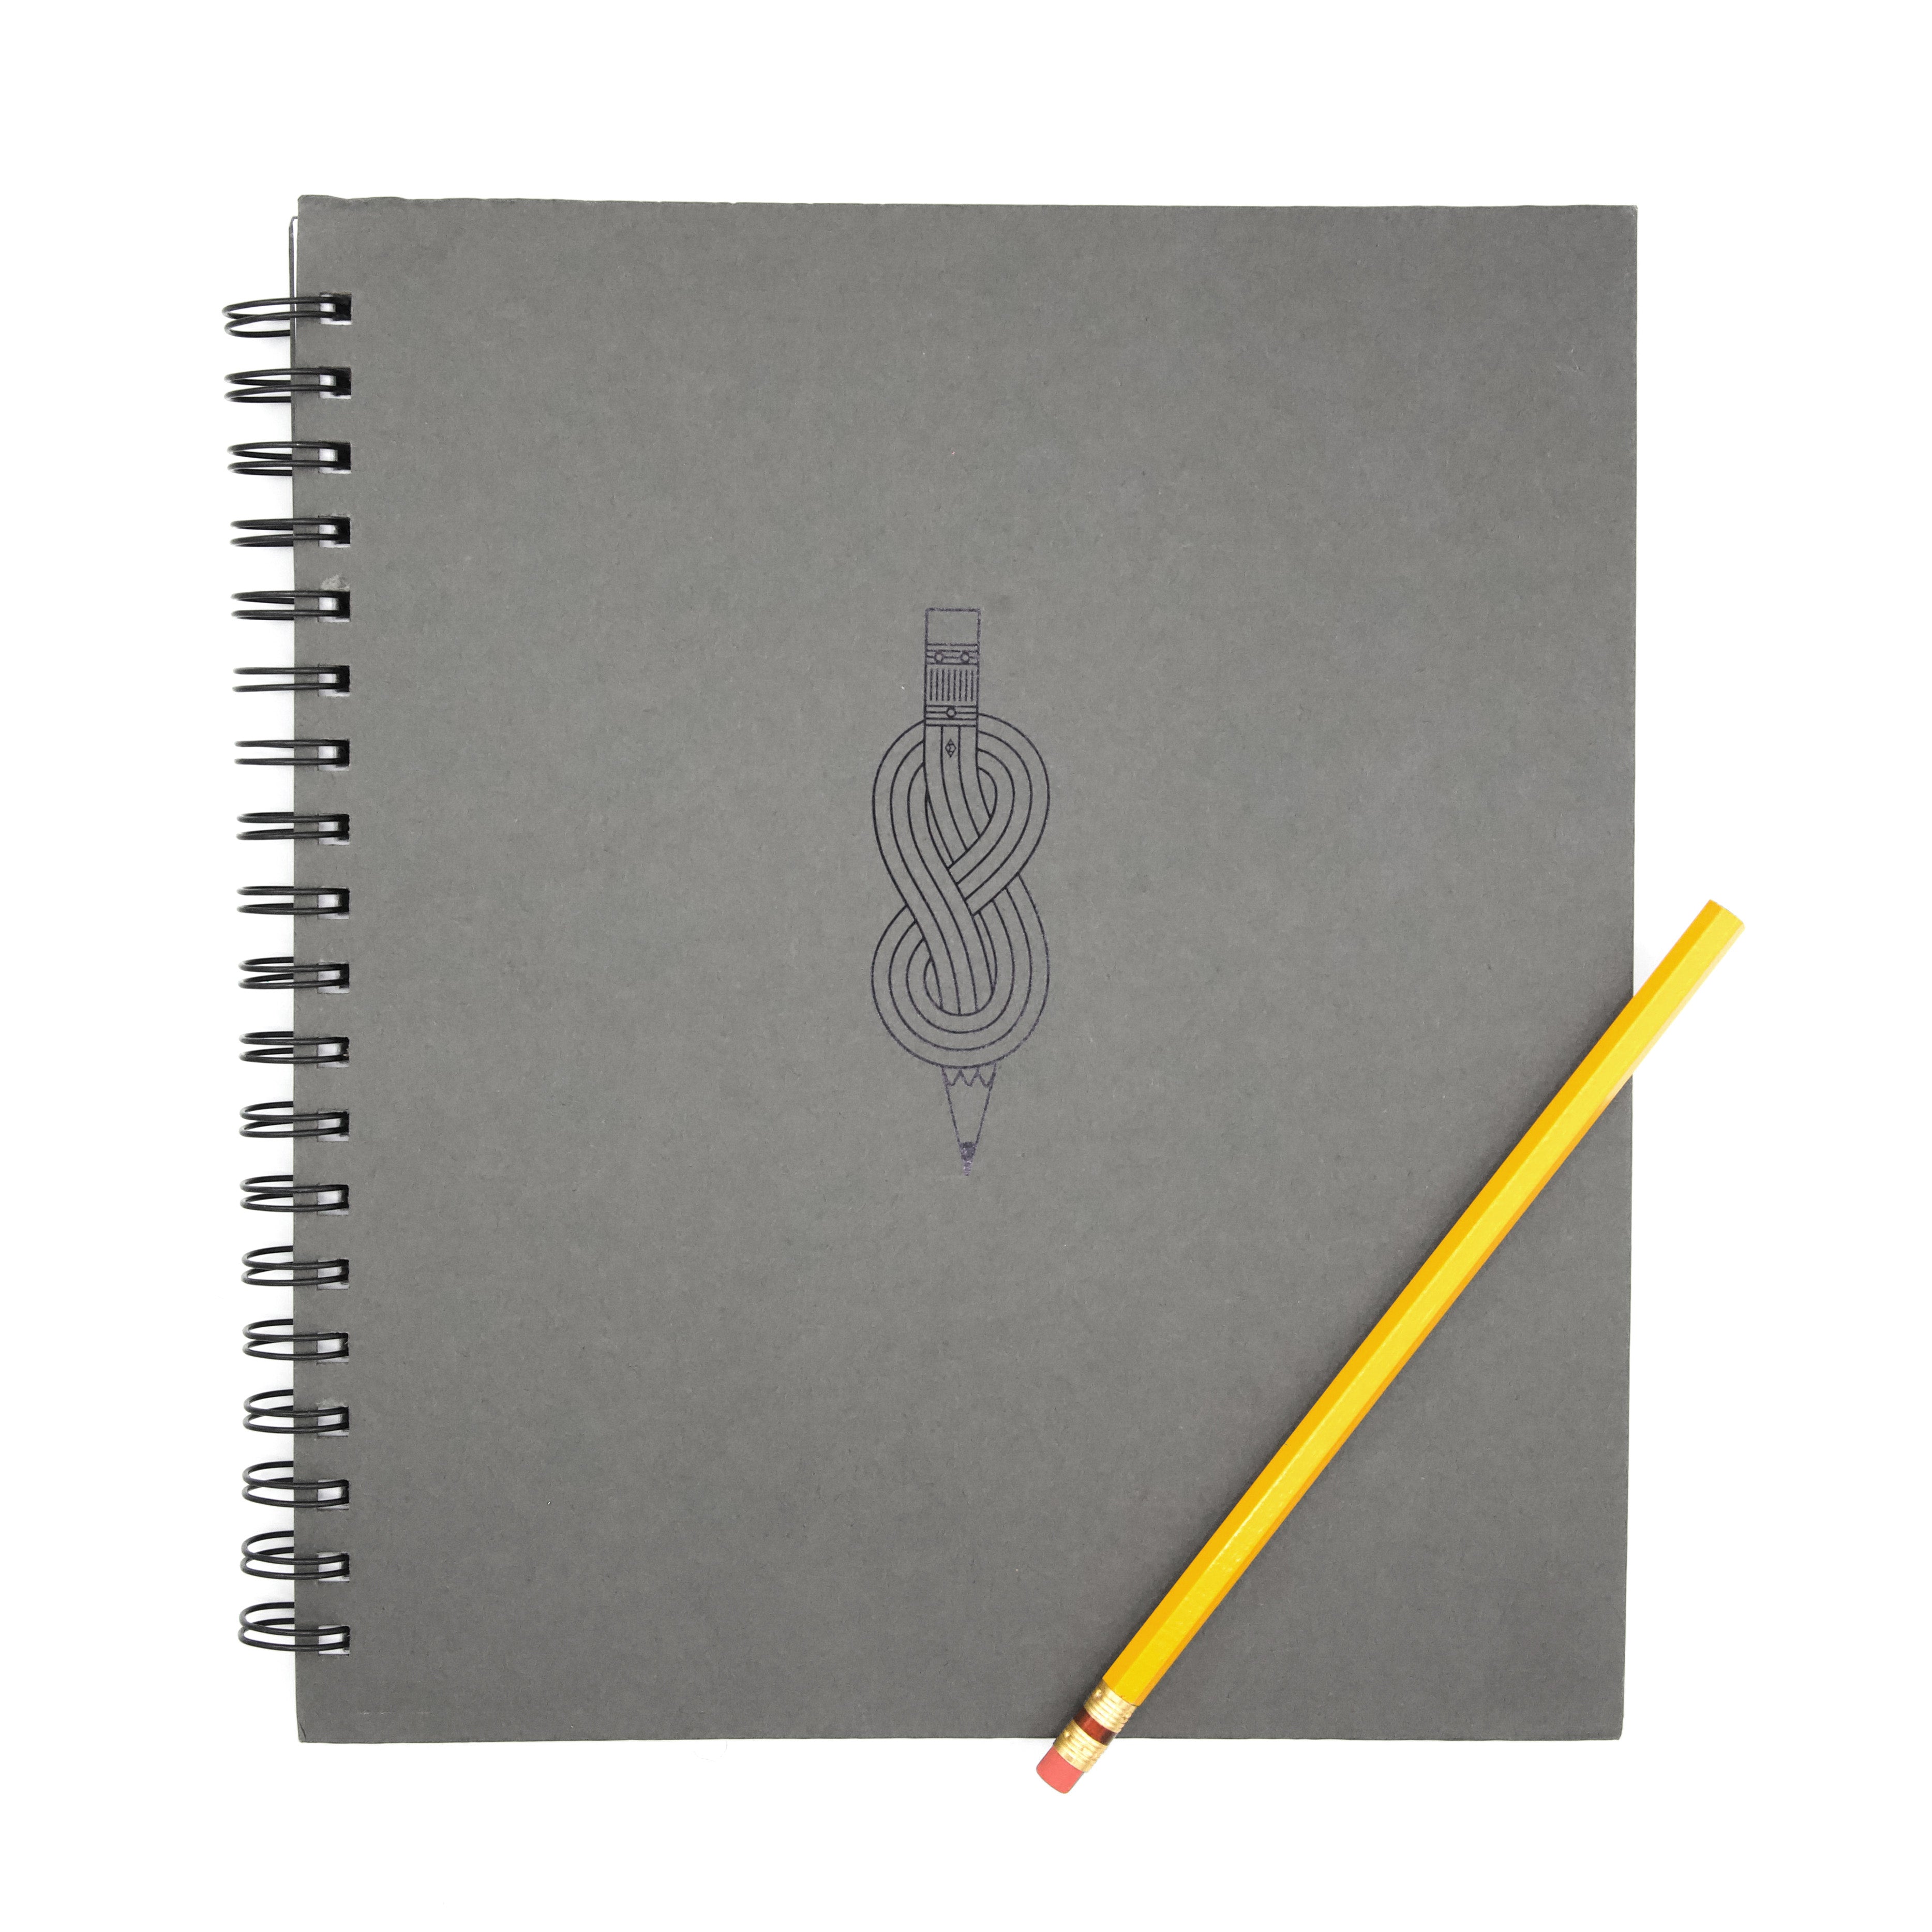 3,814 No Line Notebook Images, Stock Photos, 3D objects, & Vectors